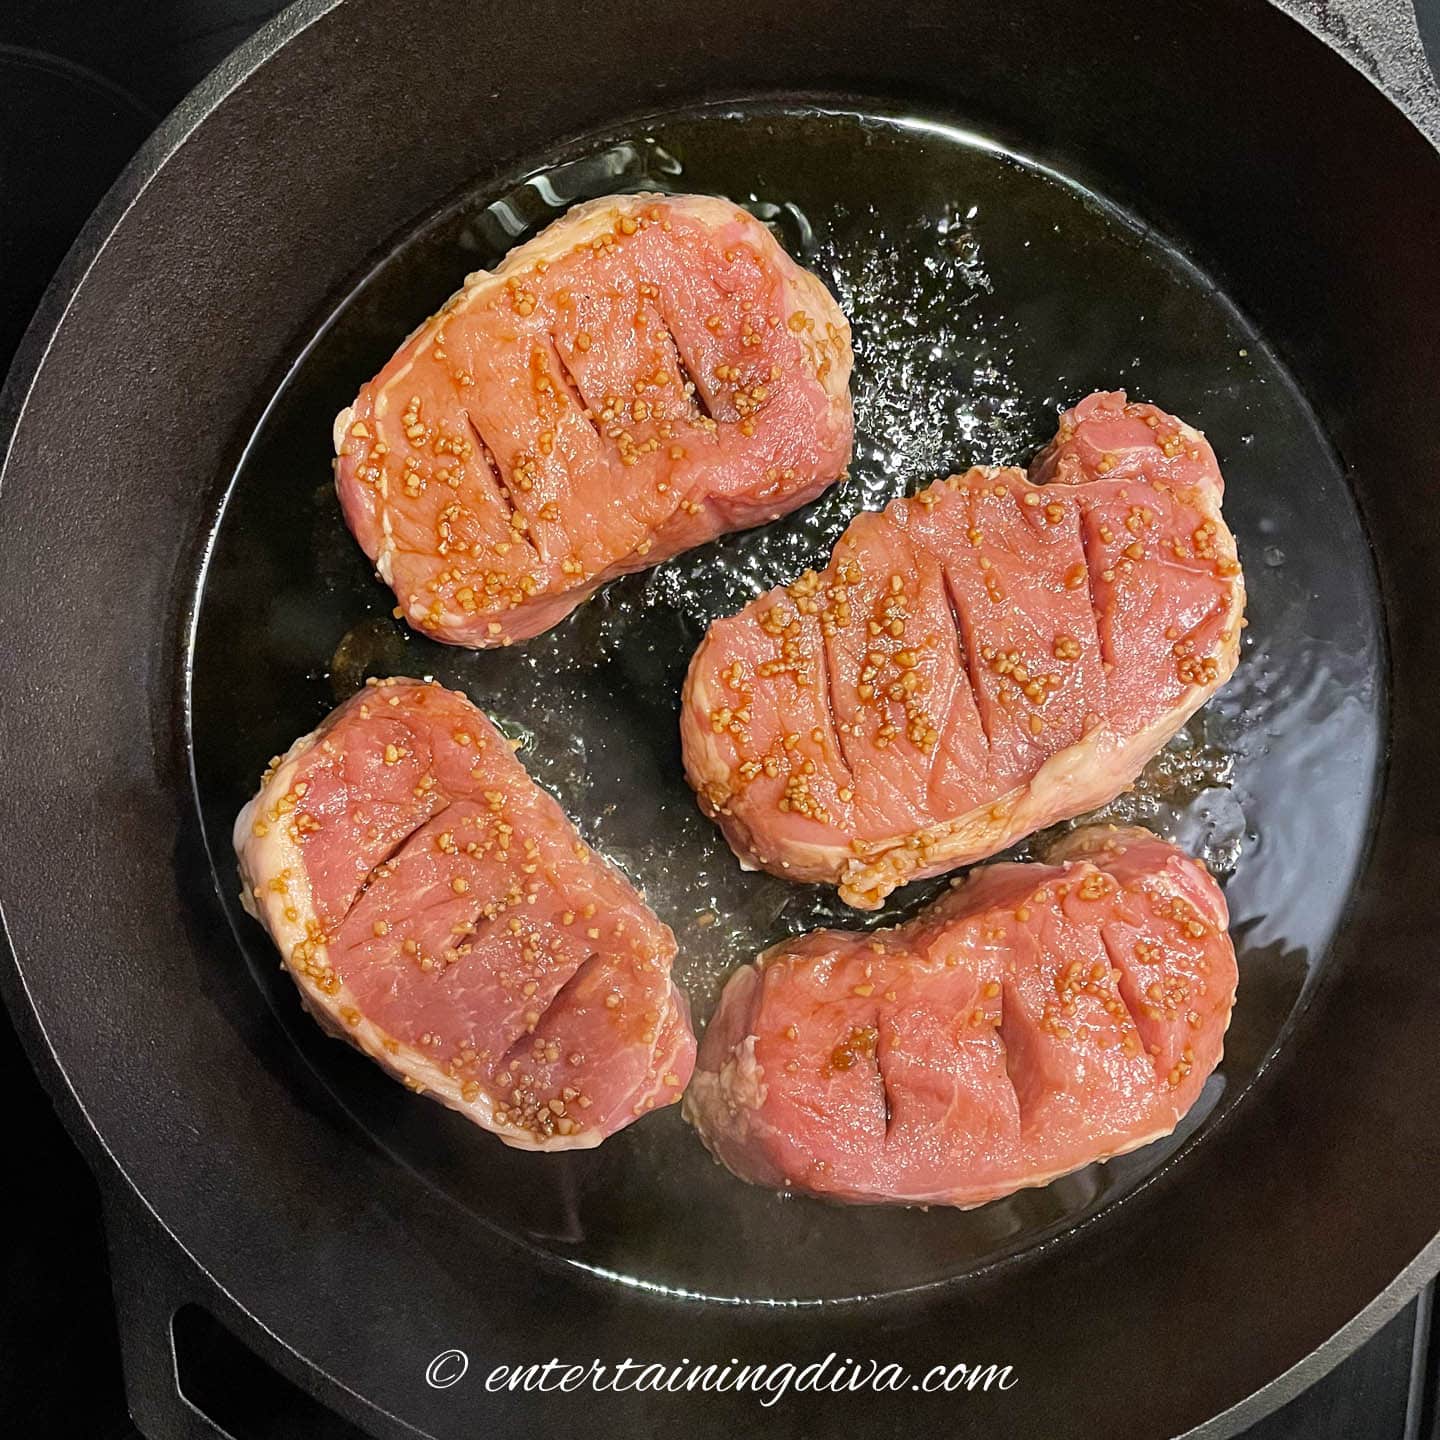 Thick pork chops being seared in a frying pan